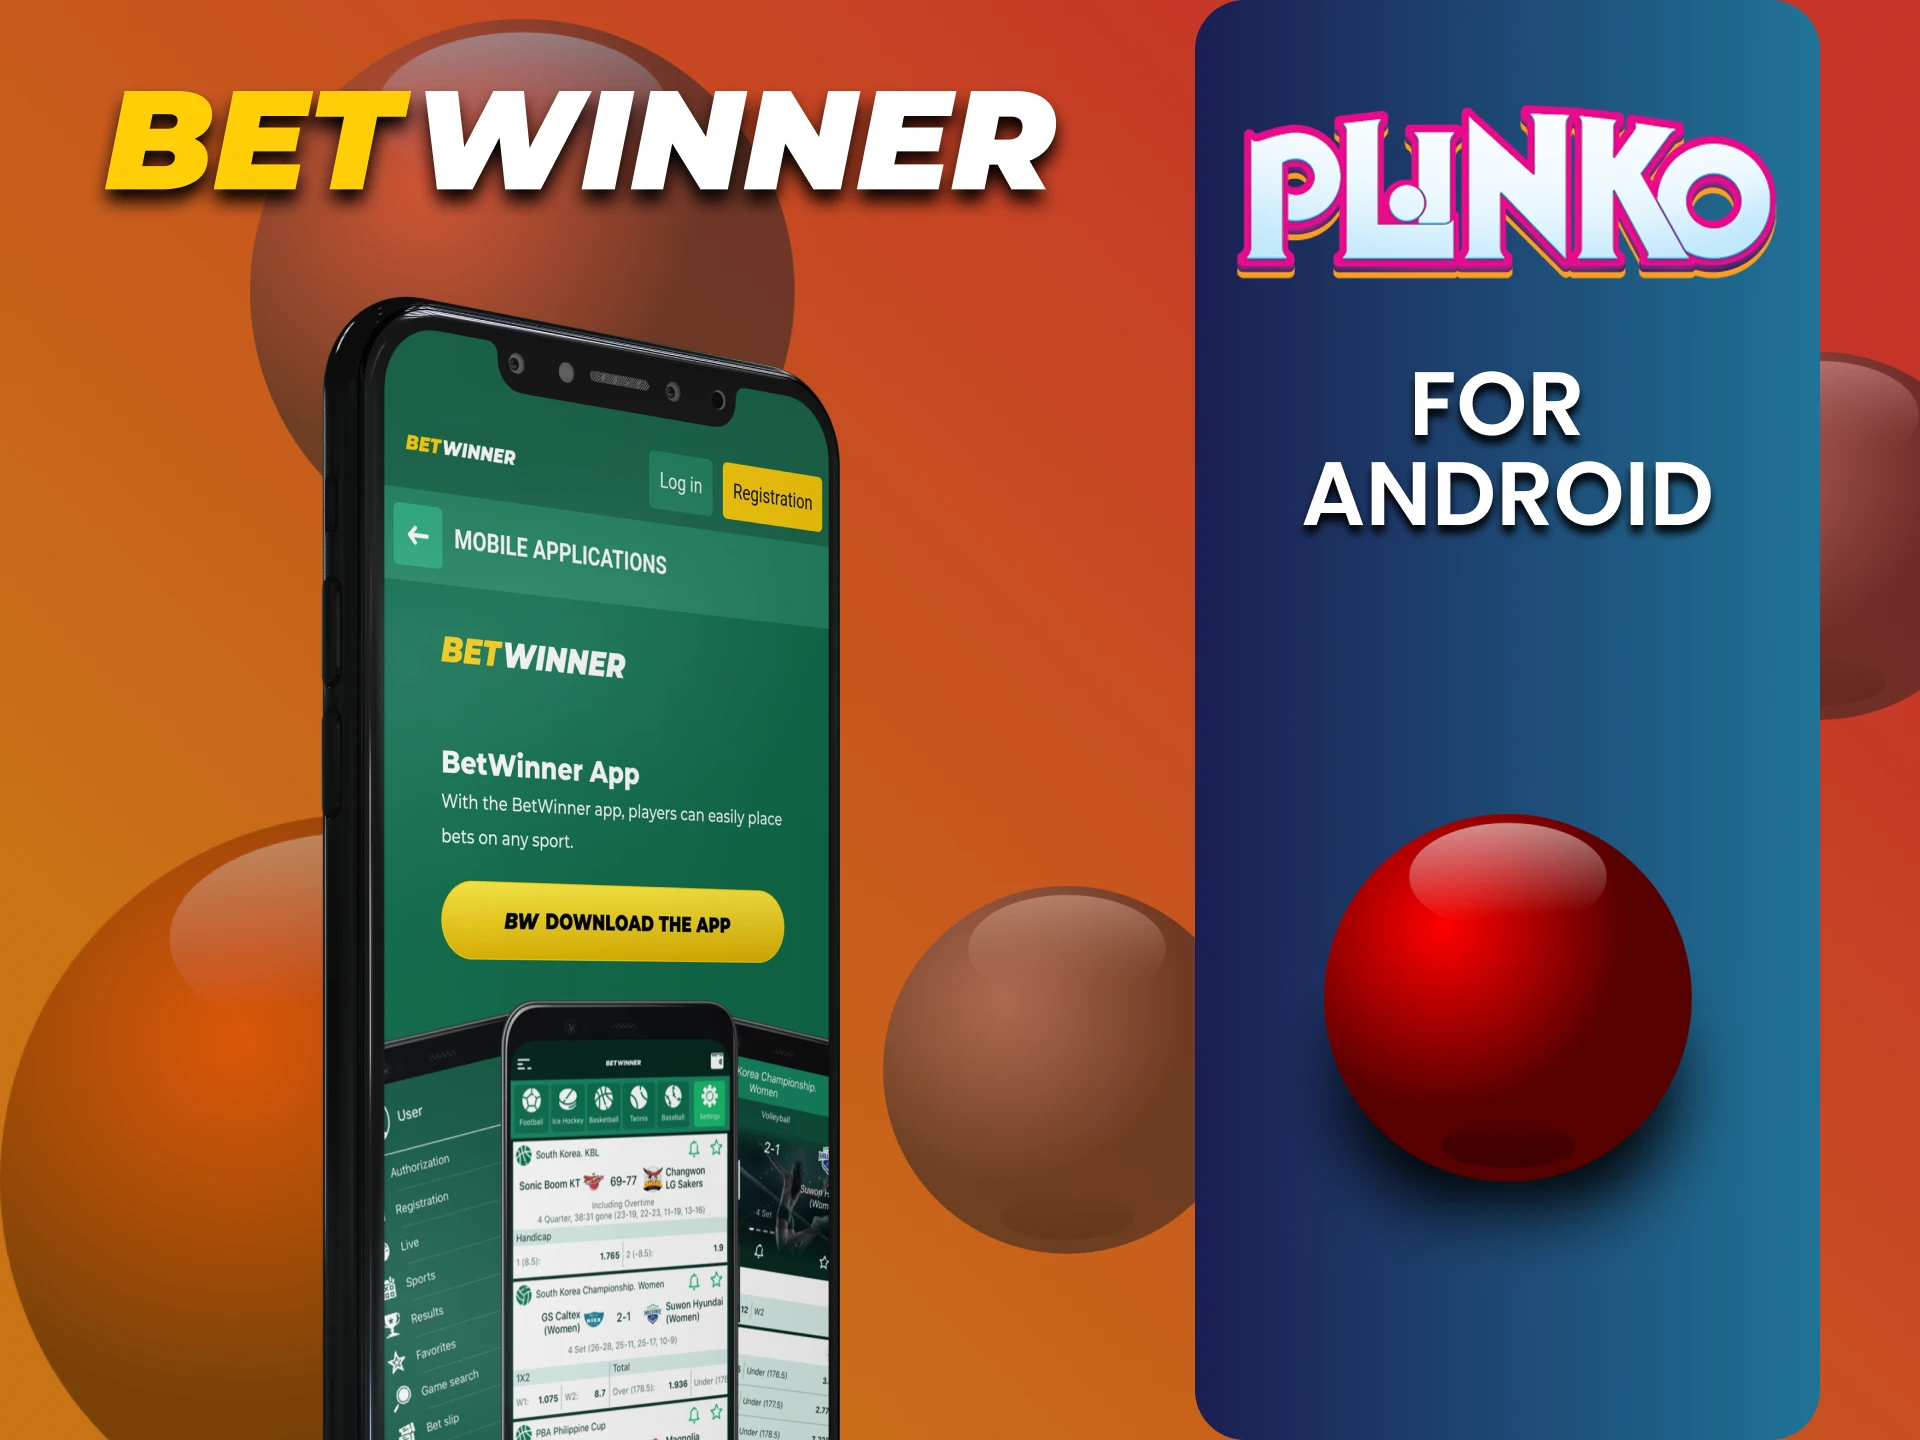 Download the Betwinner app to play Plinko on Android.